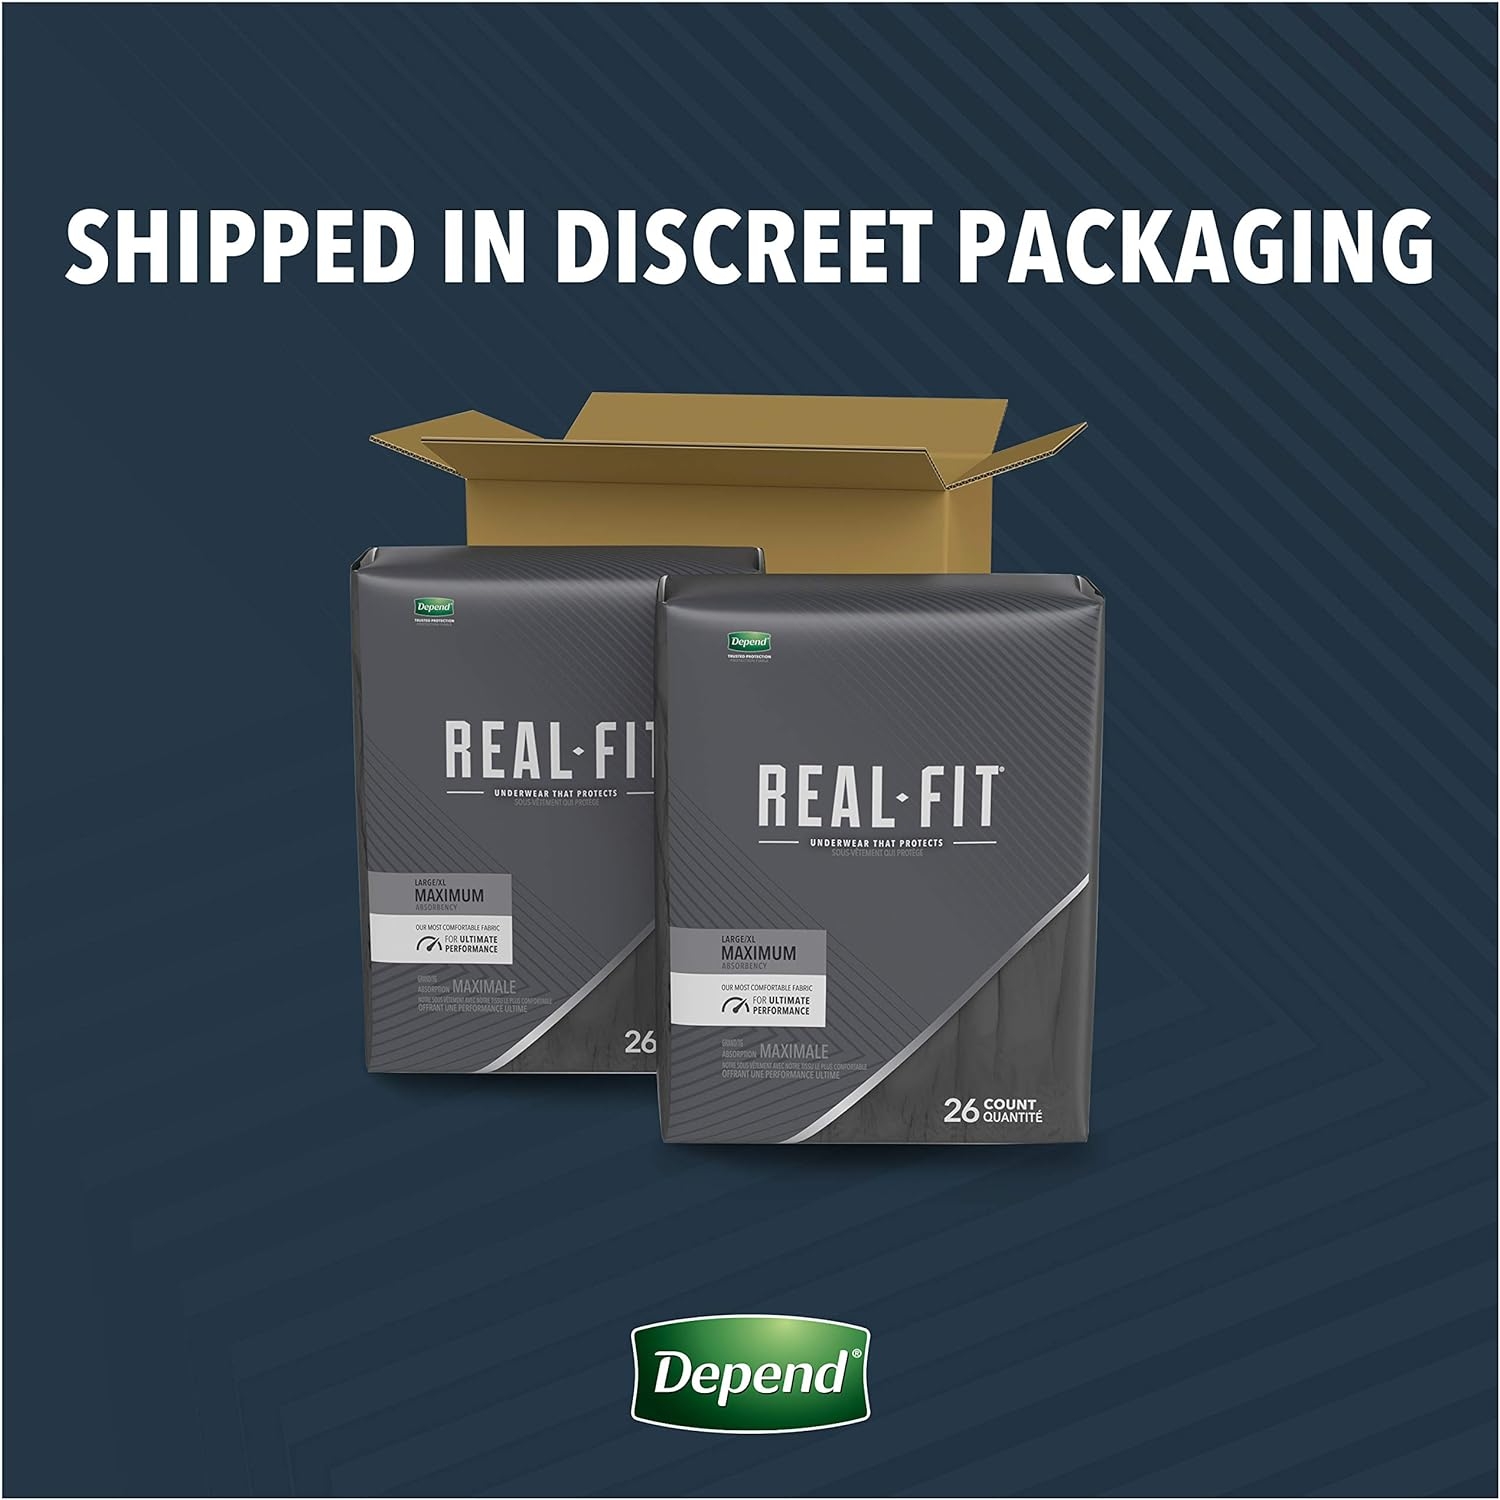 Depend Real Fit Incontinence Underwear for Men, Maximum Absorbency, Disposable, Large/Extra-Large, Black, 52 Count (Packaging May Vary)